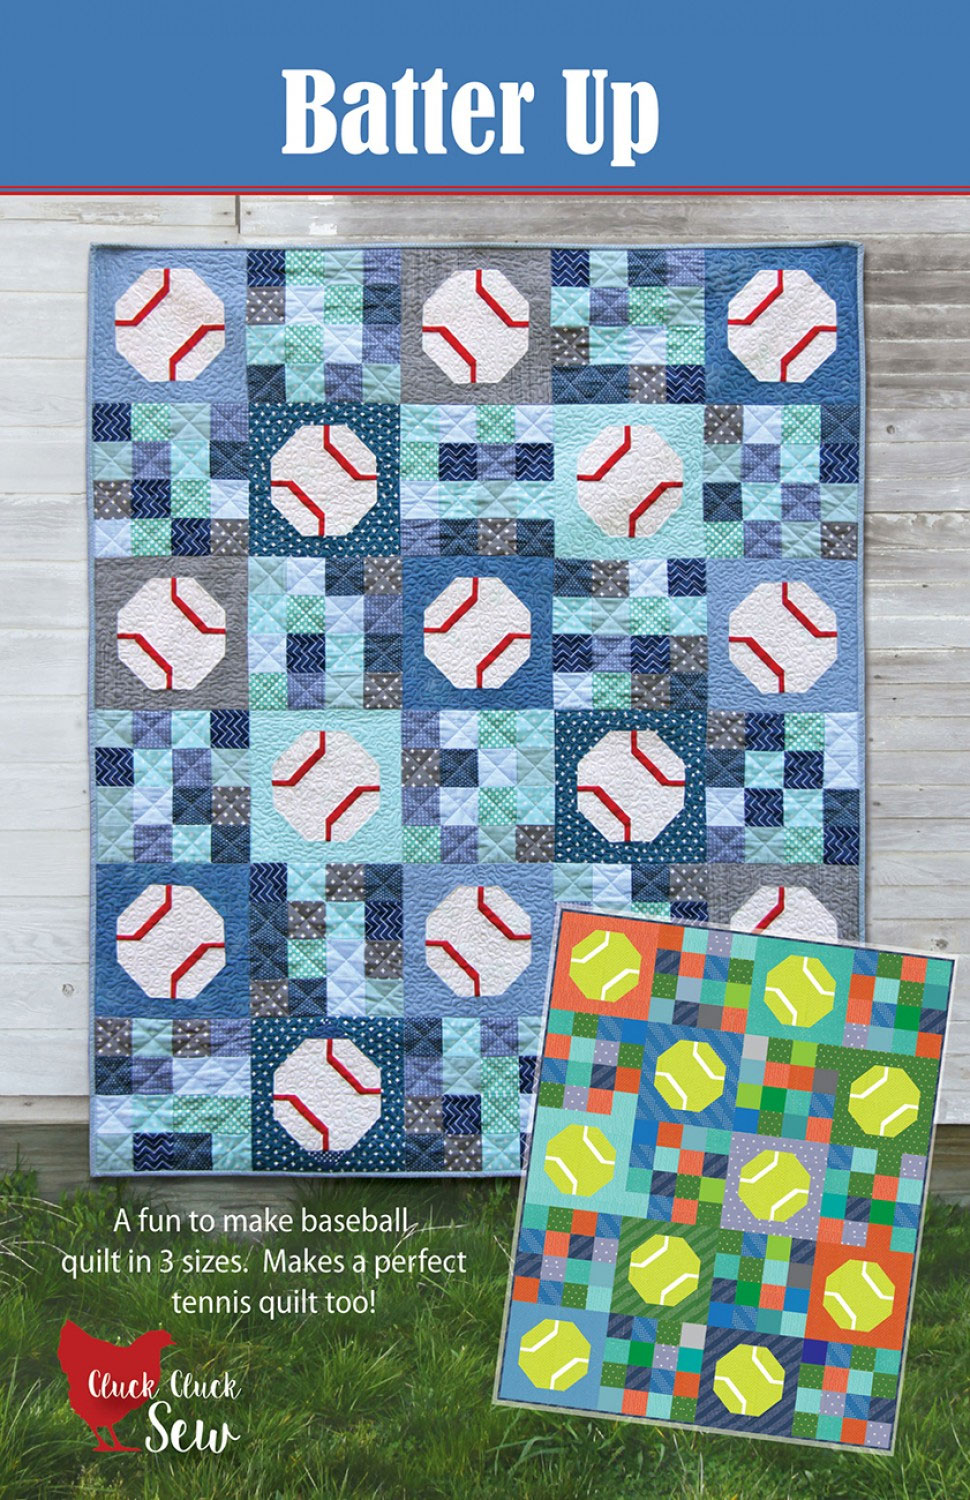 Batter-Up-quilt-sewing-pattern-Cluck-Cluck-Sew-front